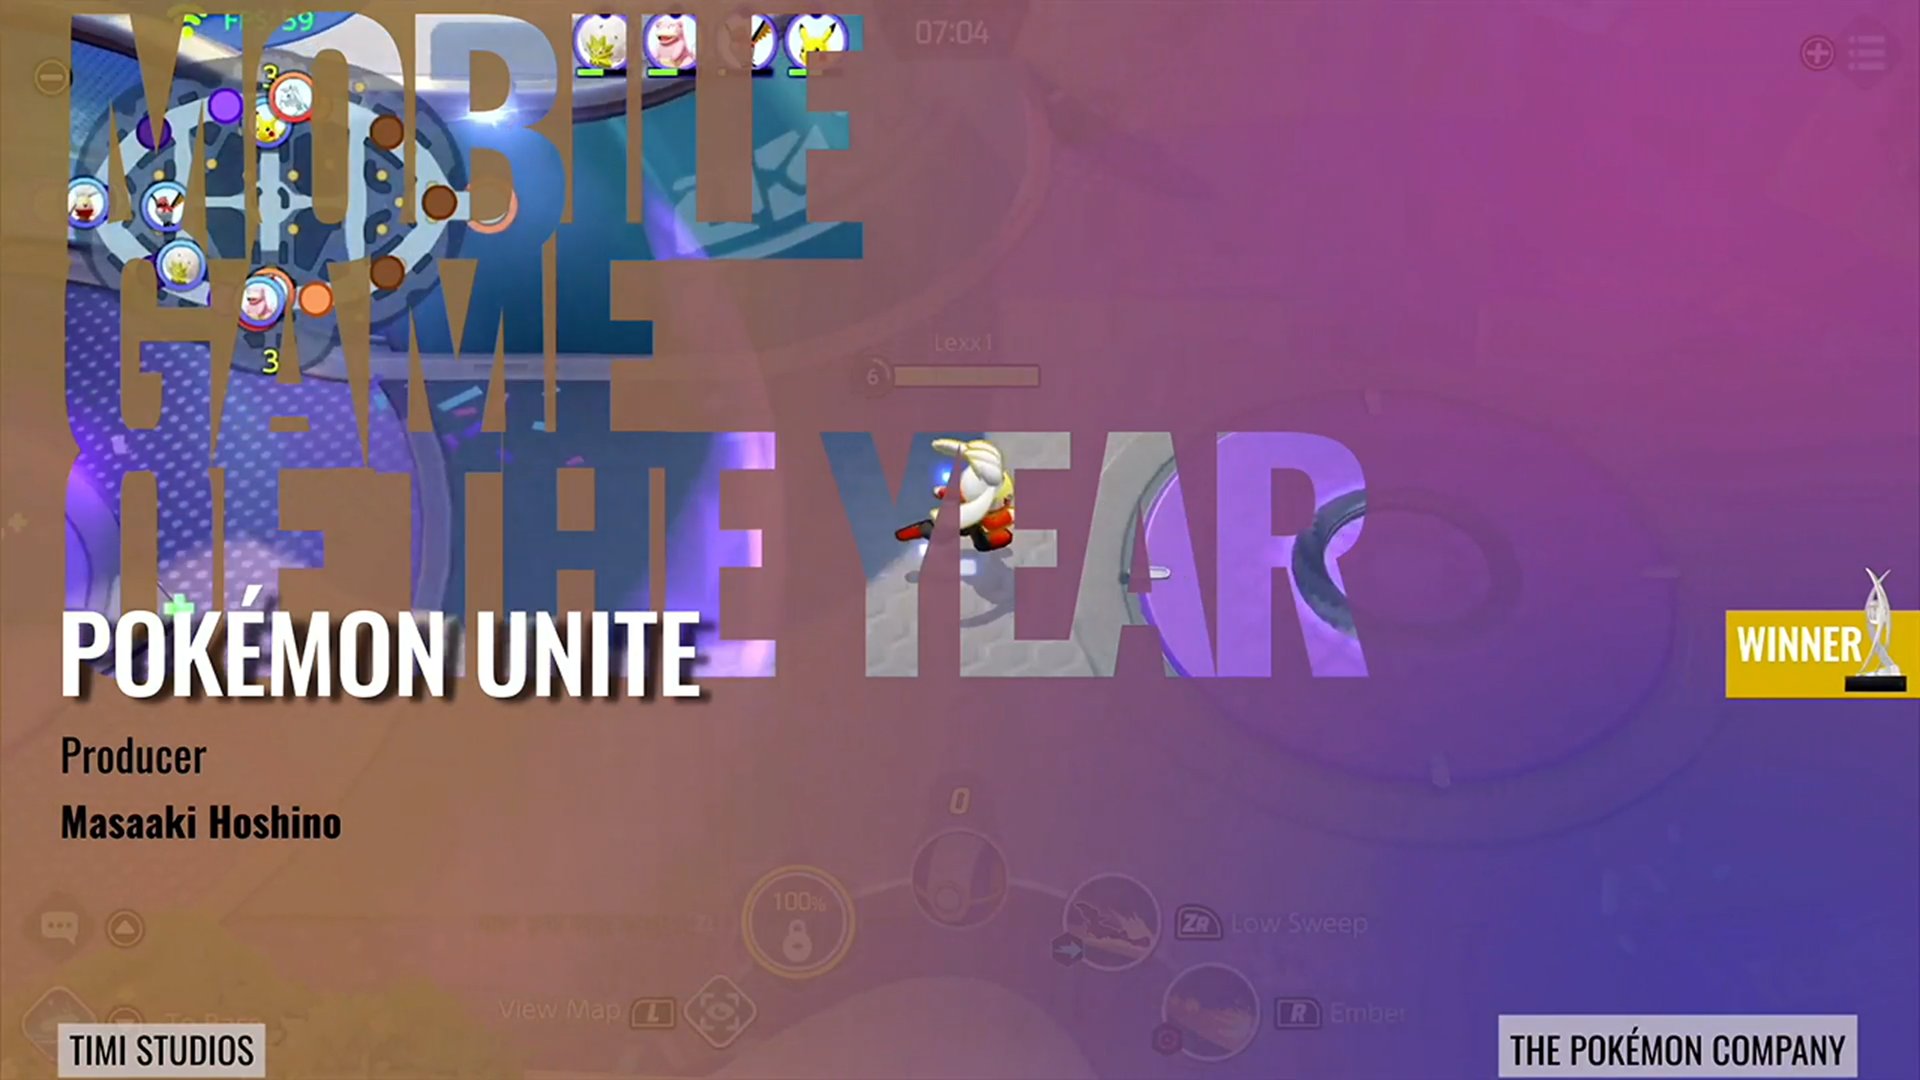 It Takes Two Wins Game Of The Year At 2022 DICE Awards, Ratchet